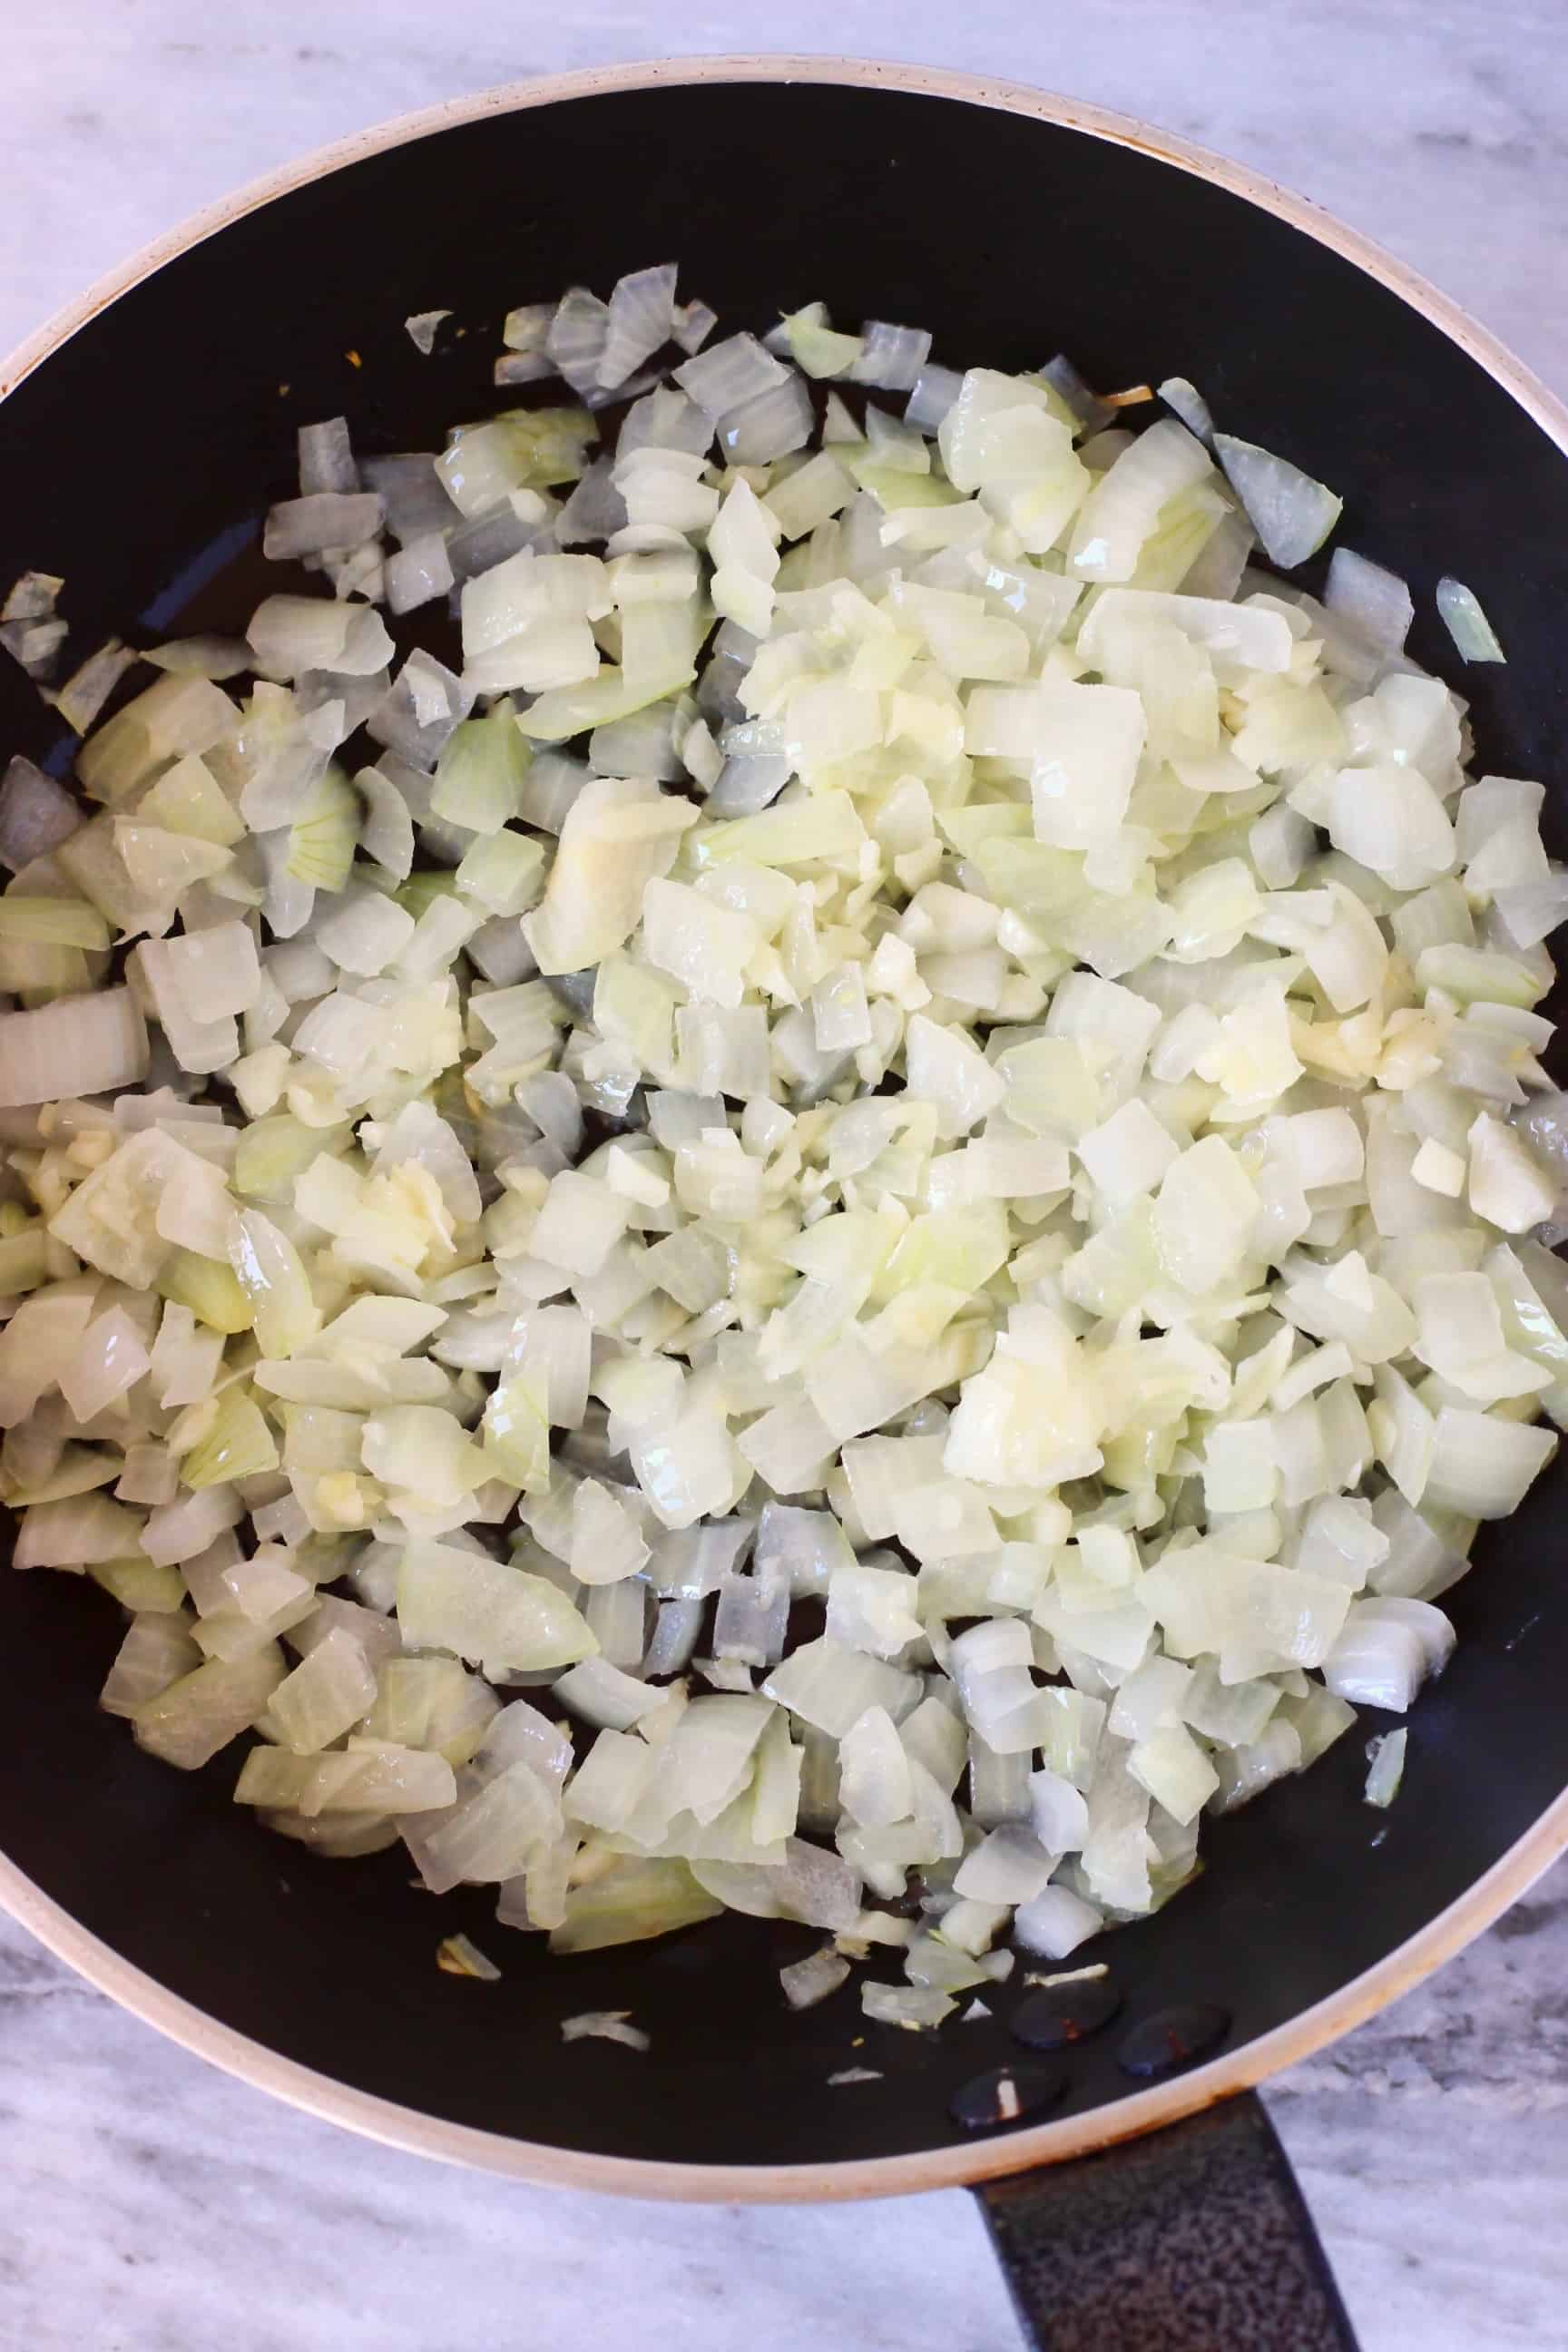 Diced onions being fried in a black frying pan